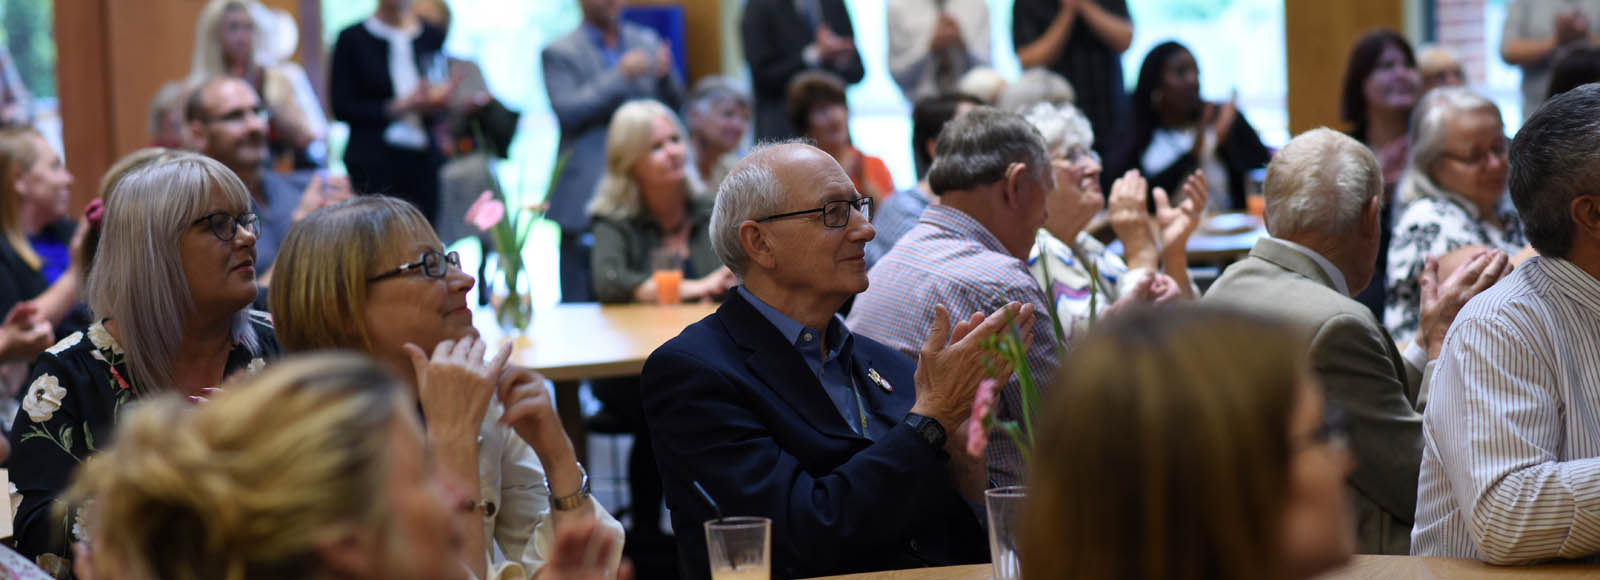 Header1600x580pxcharitable Housing Association Celebrates Anniversary With Residents Of Same